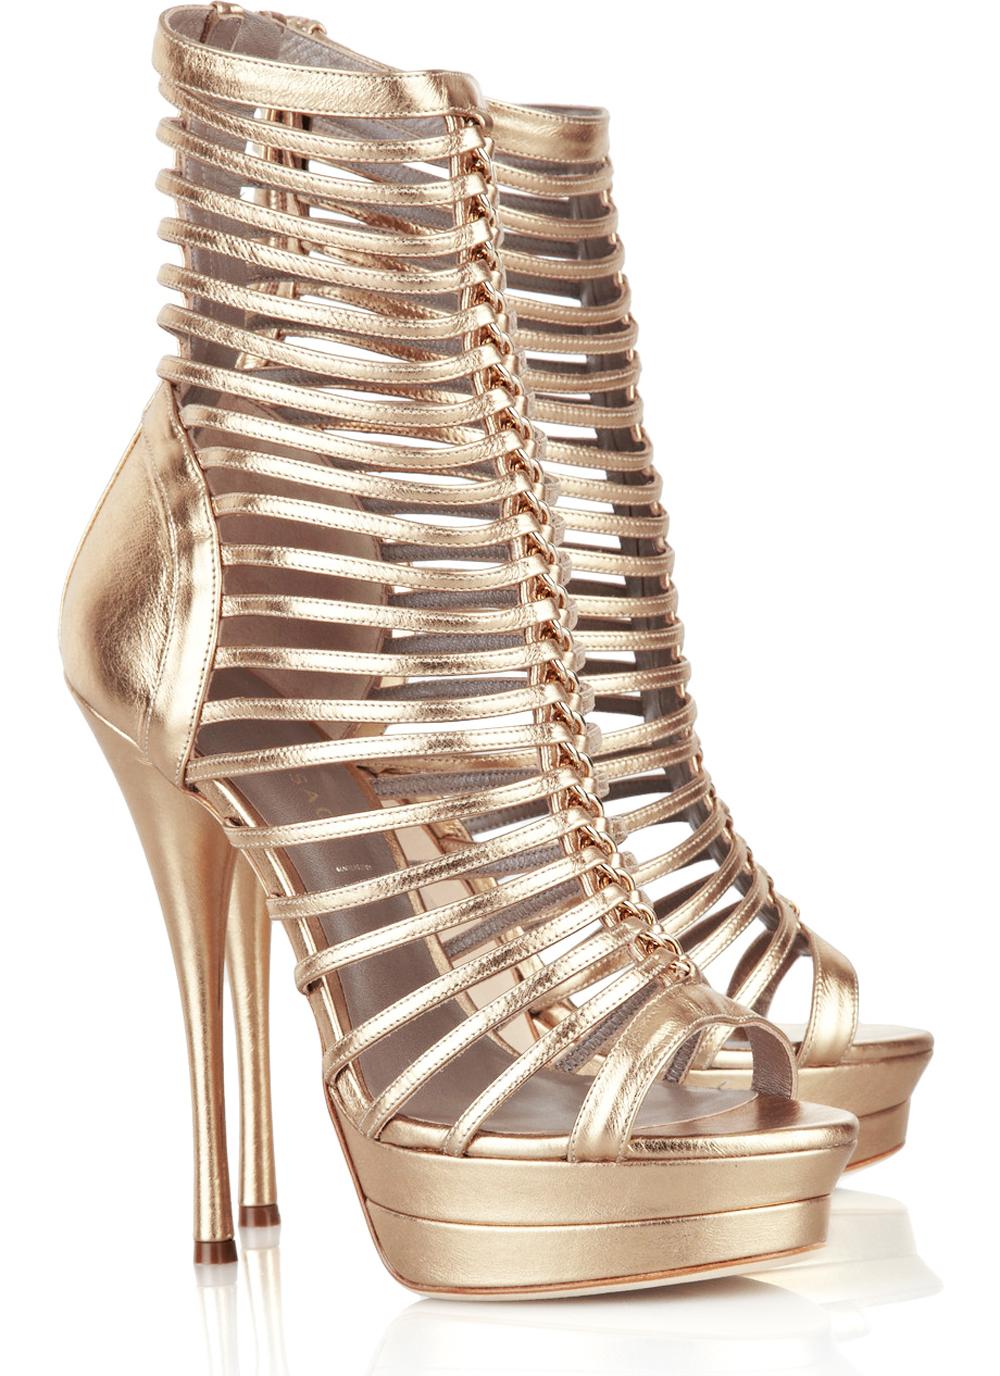 Bring high-octane glamour to the party with Versace's gold leather gladiator sandals.
Designer size 38.5 - US 8.5
Gold leather gladiator sandals with a heel that measures 5 3/4 inches and approx. 1 1/4 inches platform. Versace sandals have an almond